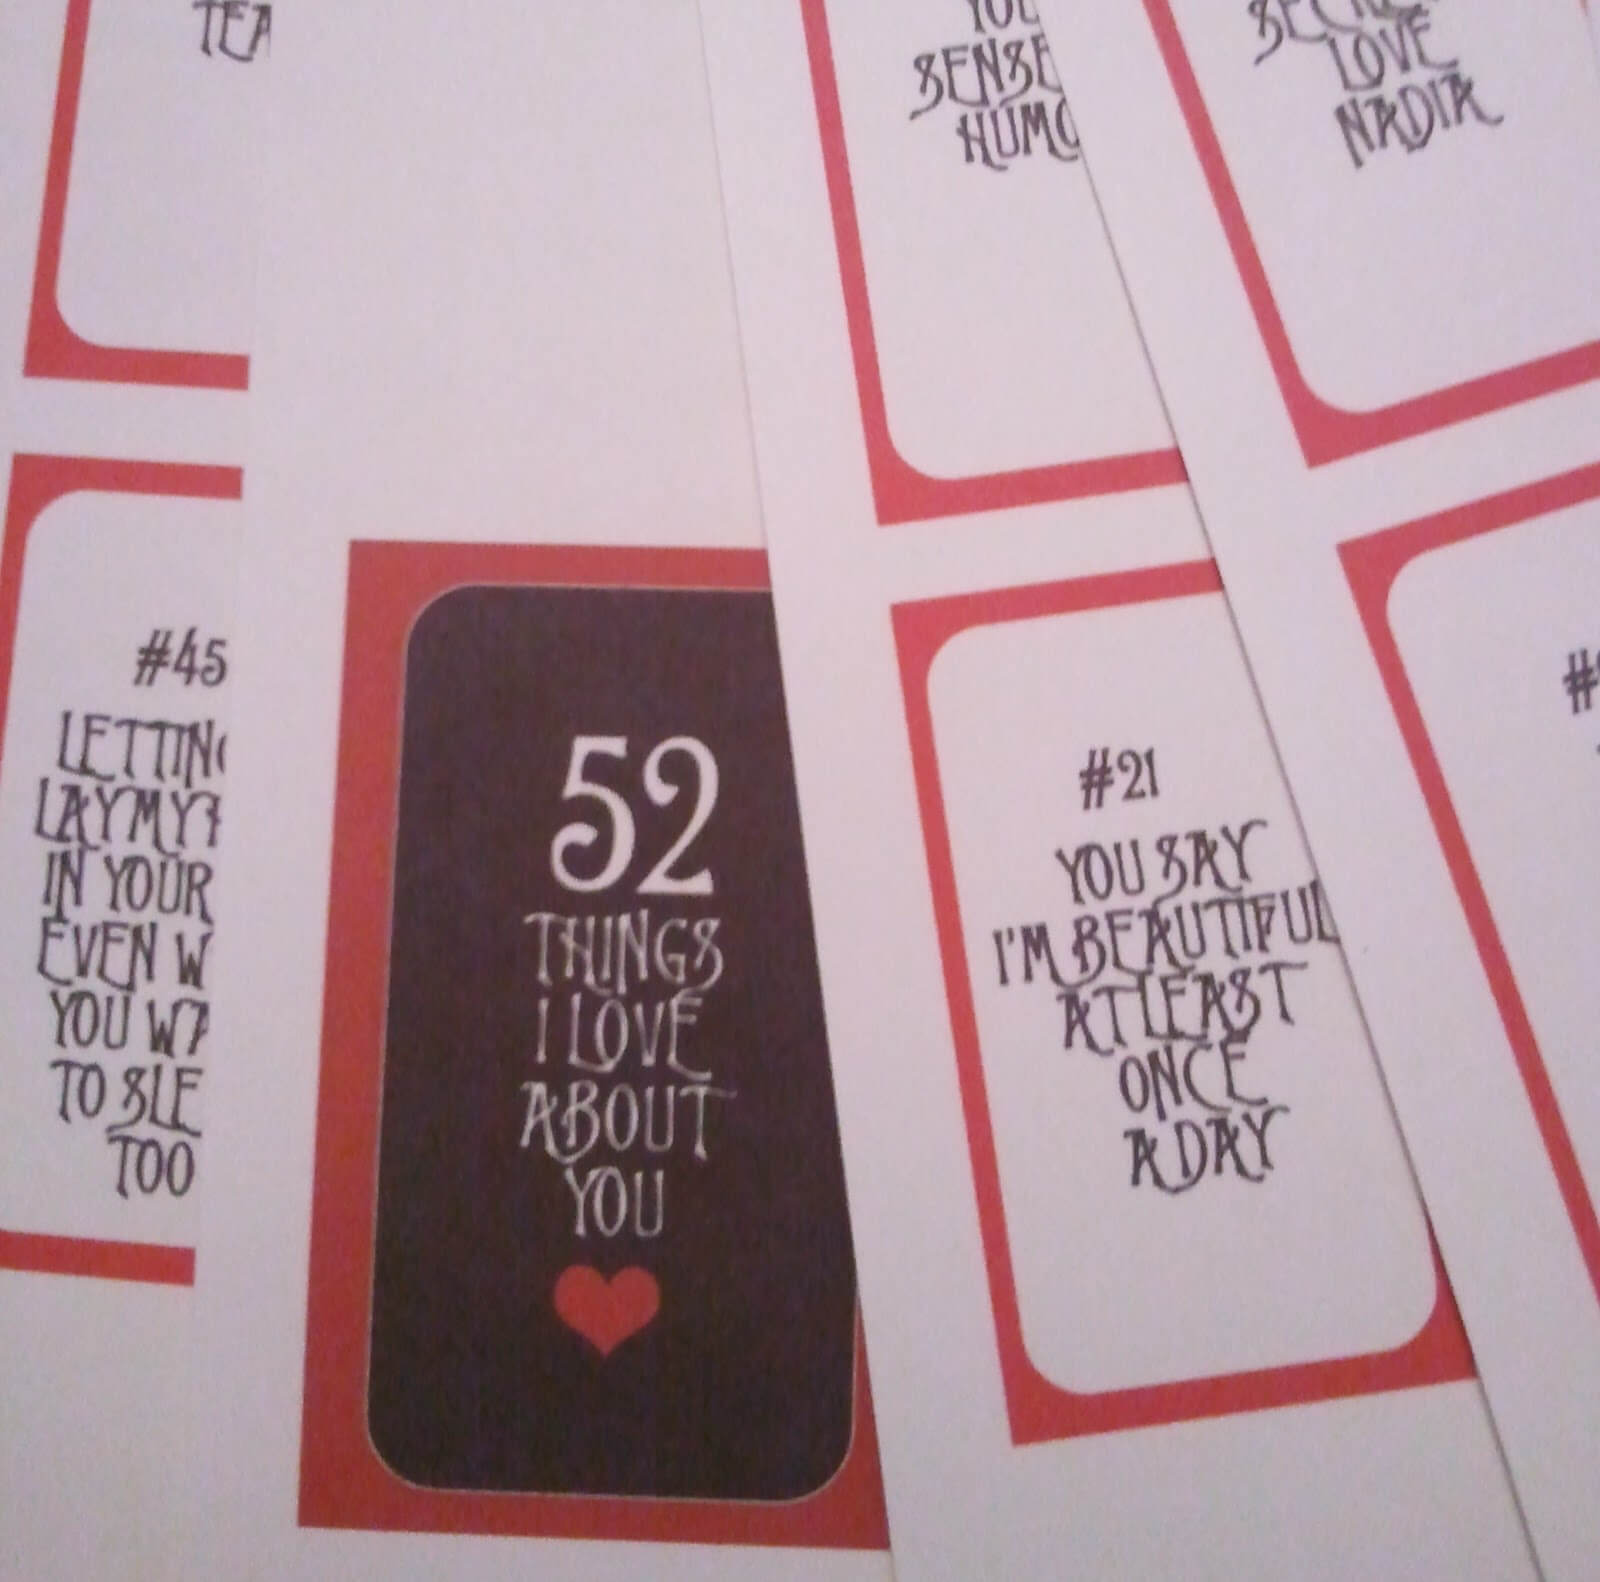 Diy Vintage Chic: 52 Reasons I Love You. Get Started On Regarding 52 Things I Love About You Deck Of Cards Template